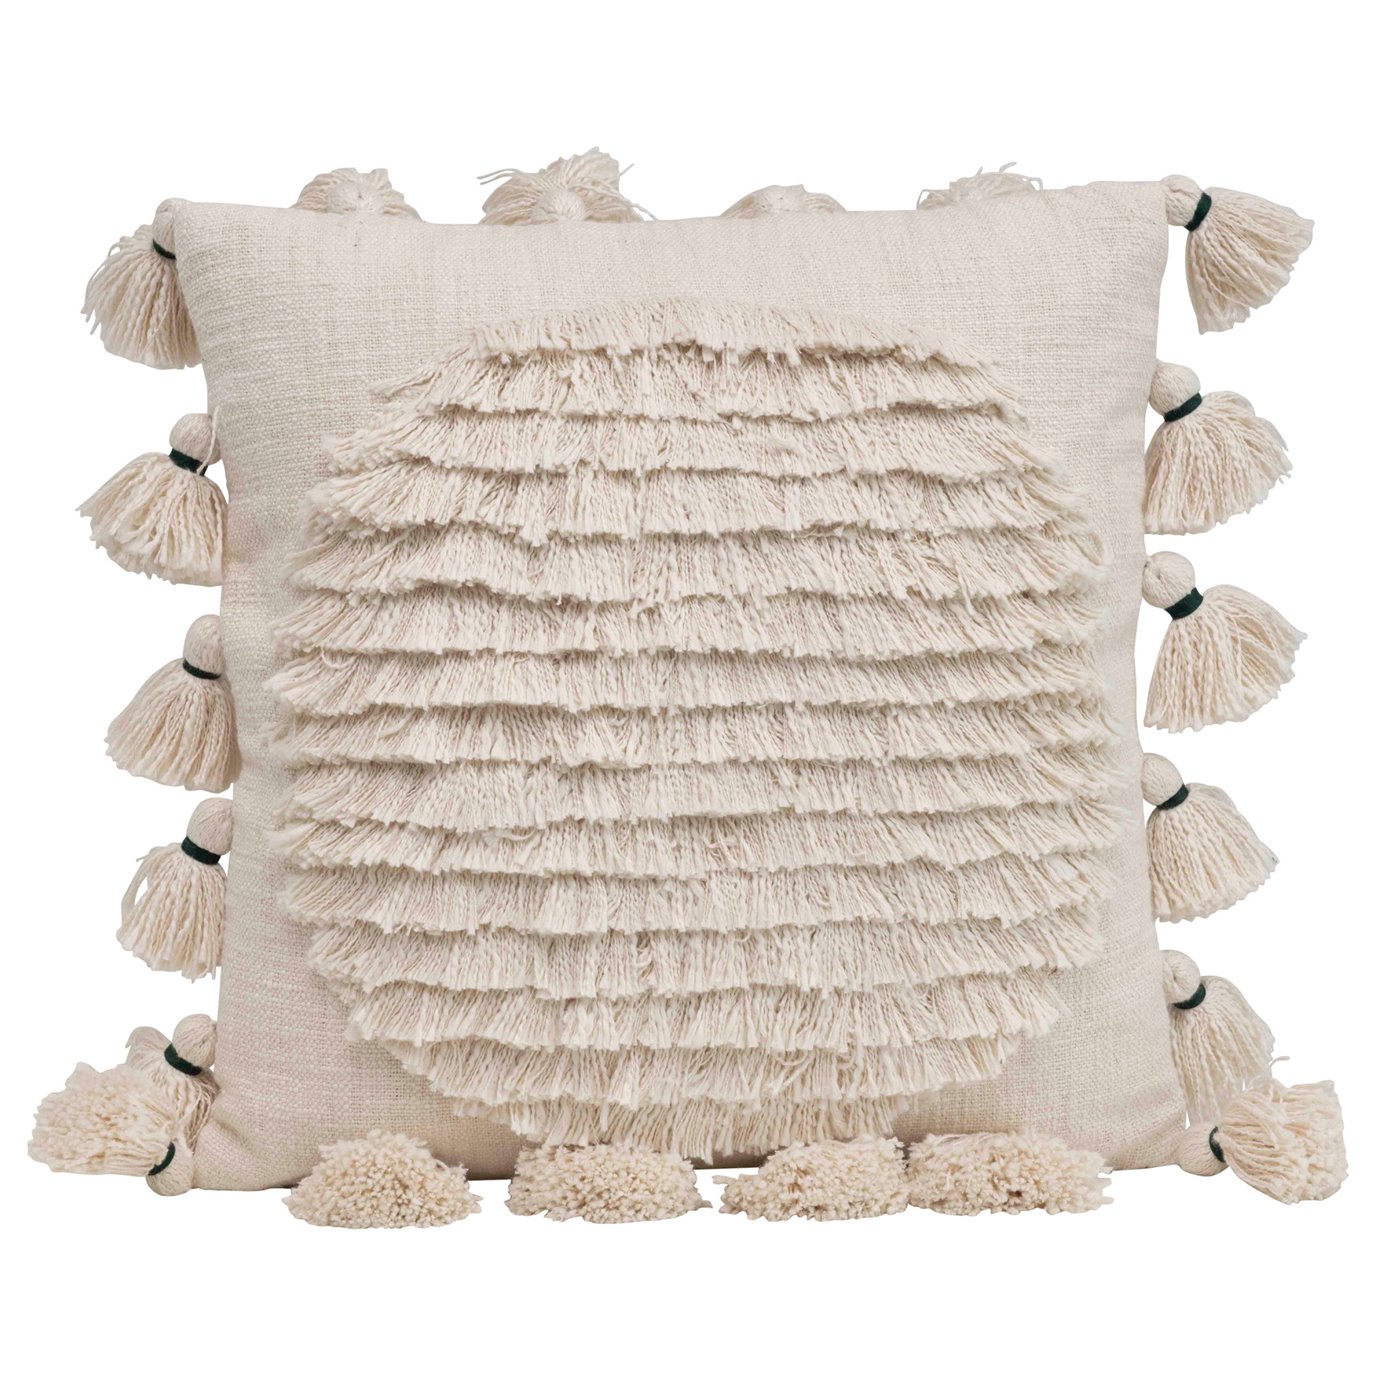 Square Cotton Embroidered Pillow with Fringed Circle Design and Tassel Trim